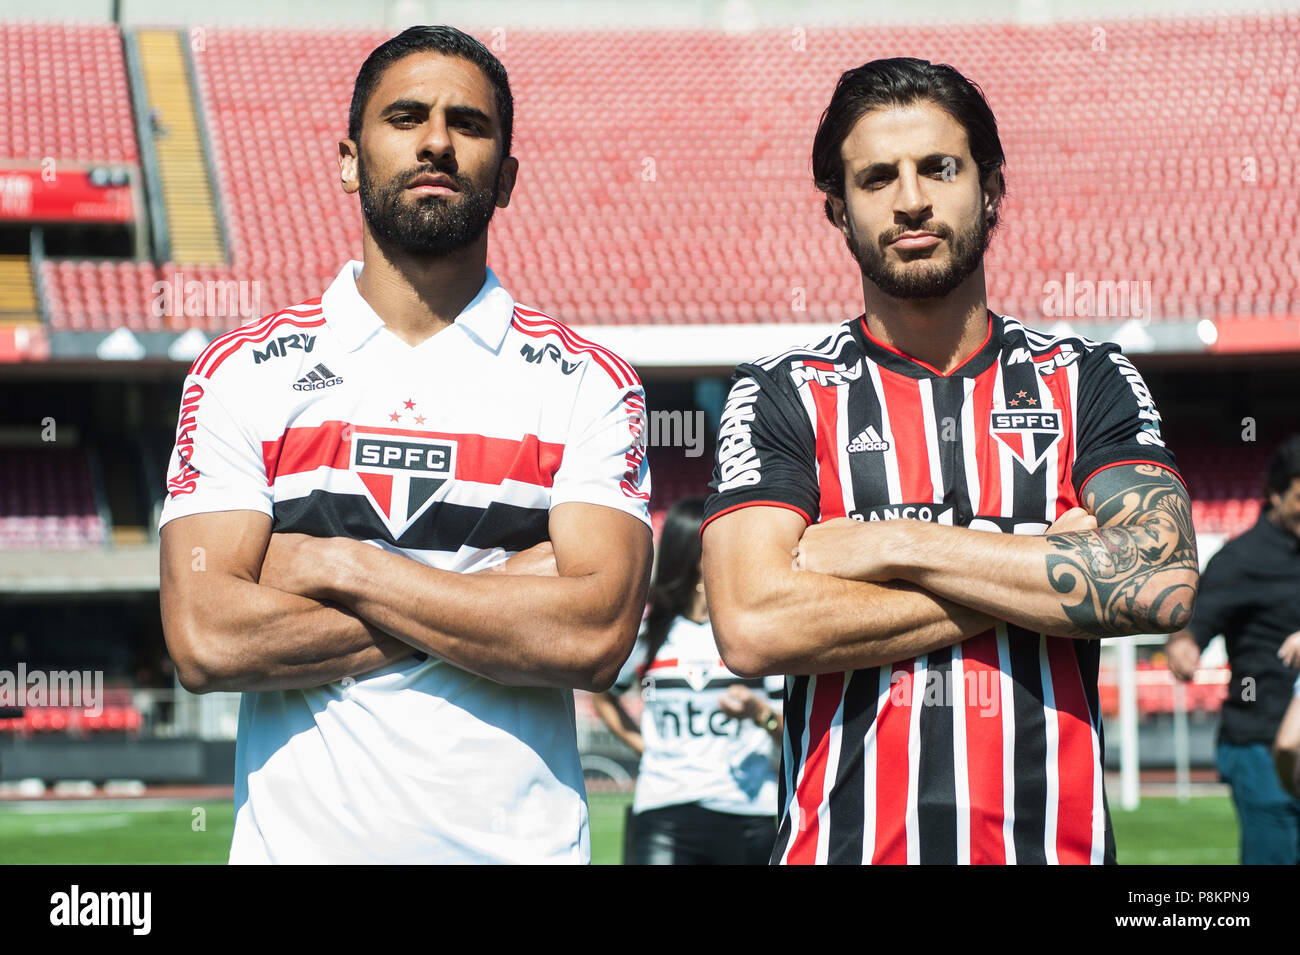 SÃO PAULO, SP - 12.07.2018: TREINO DO SPFC - Trellez and Hudson of the SPFC  during the presentation of the new Adidas uniform, held at the Morumbi  Stadium in the south of